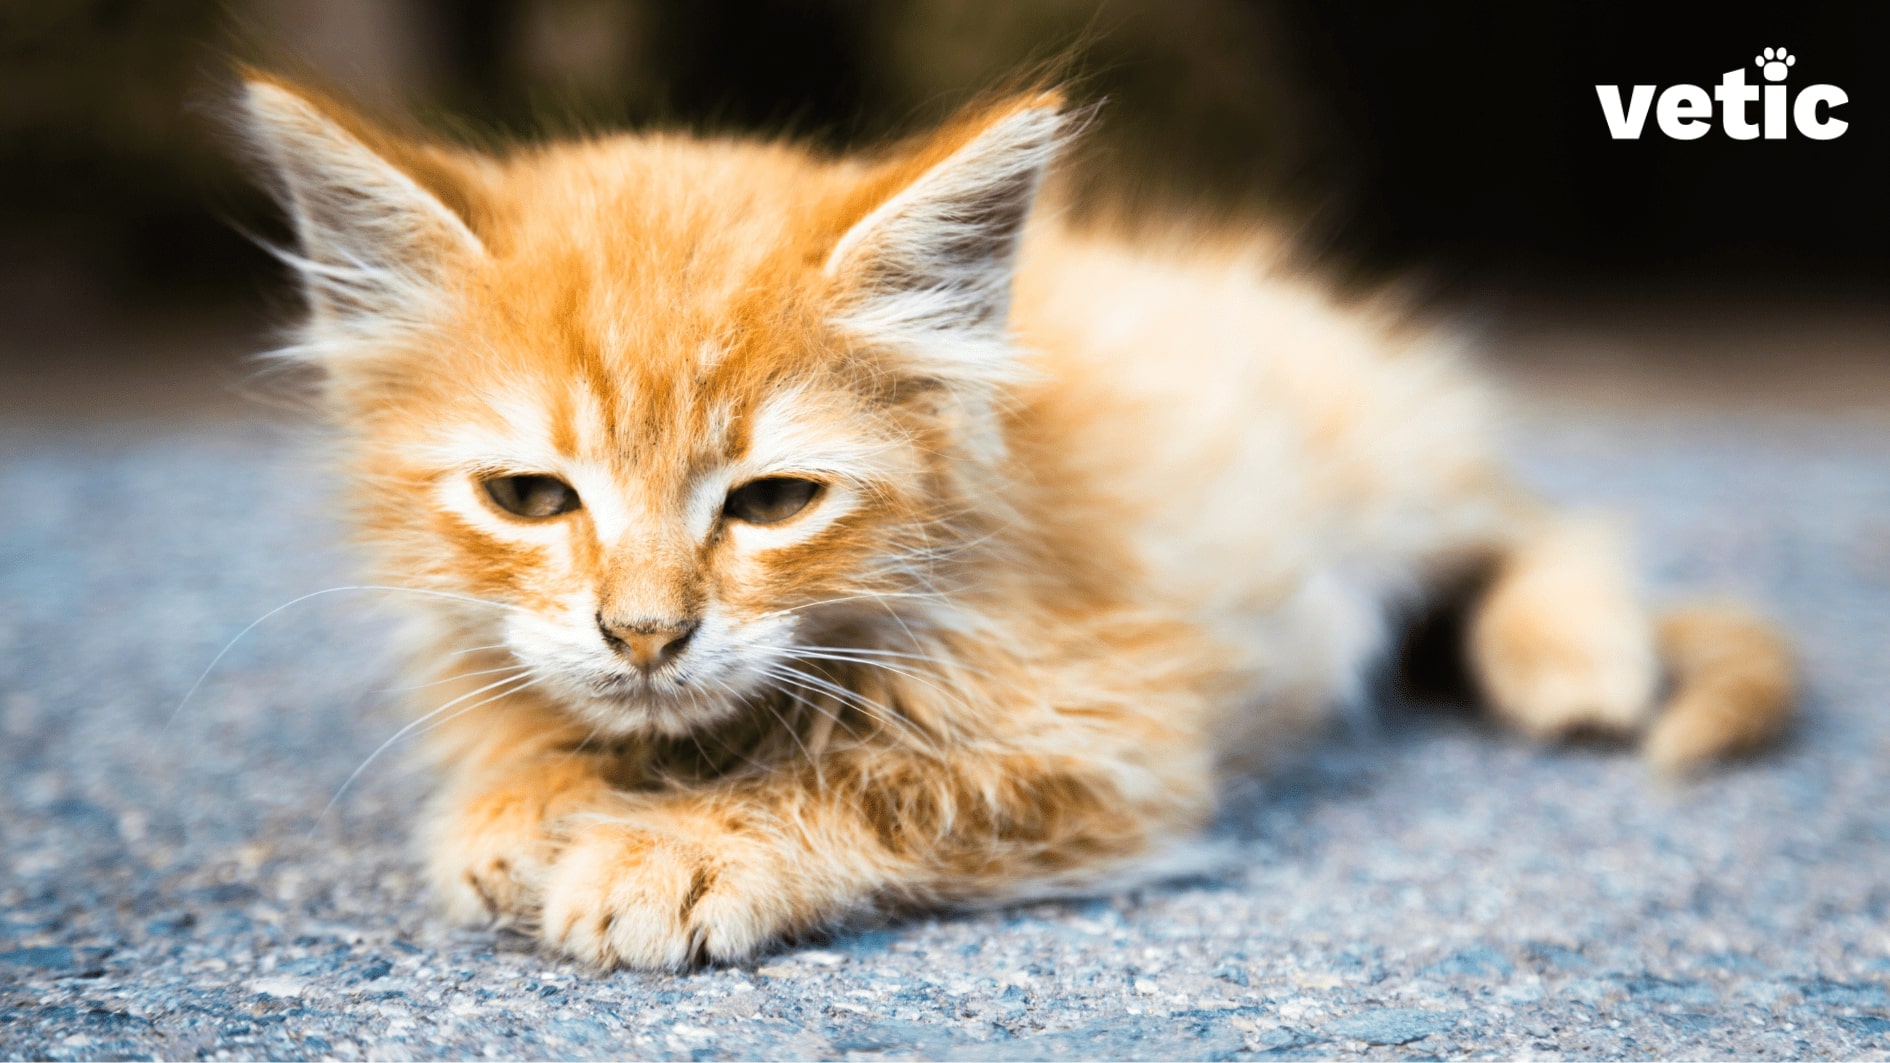 Orange tabby outdoor kitten looking sad and sick. Kittens are often susceptible to parasitic diseases such as haemoprotozoa